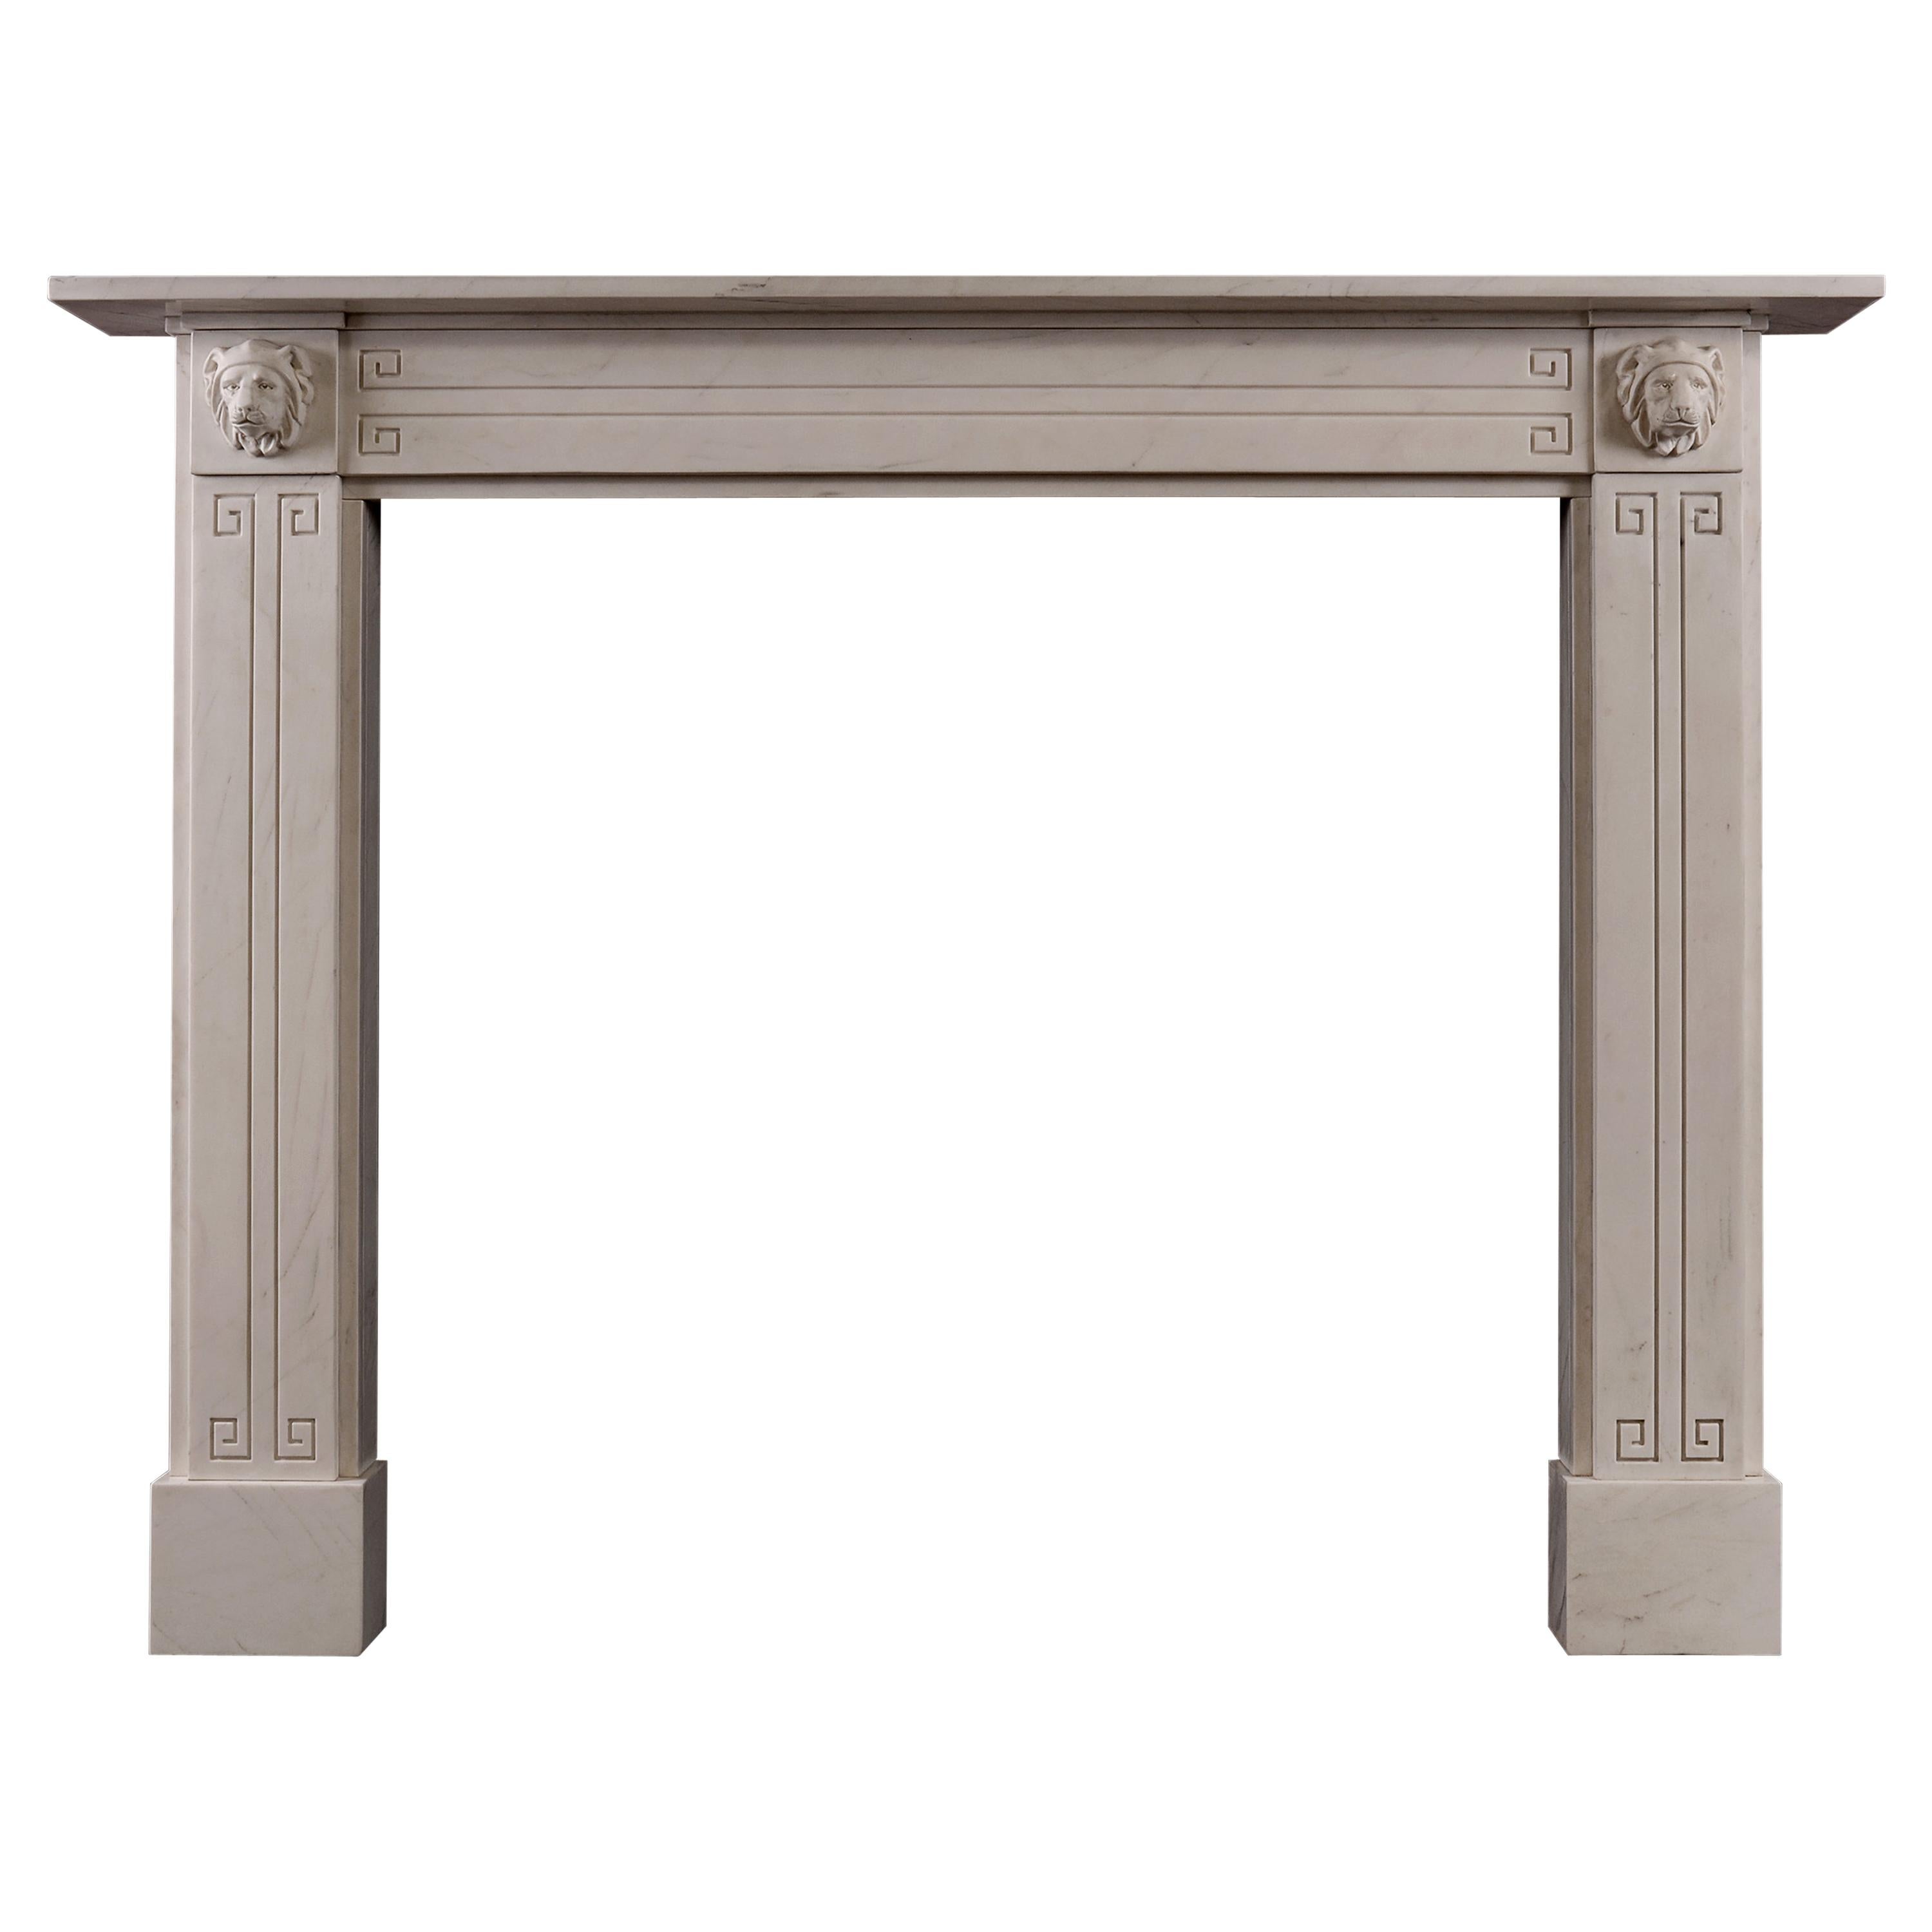 Attractive English Regency Fireplace in White Marble